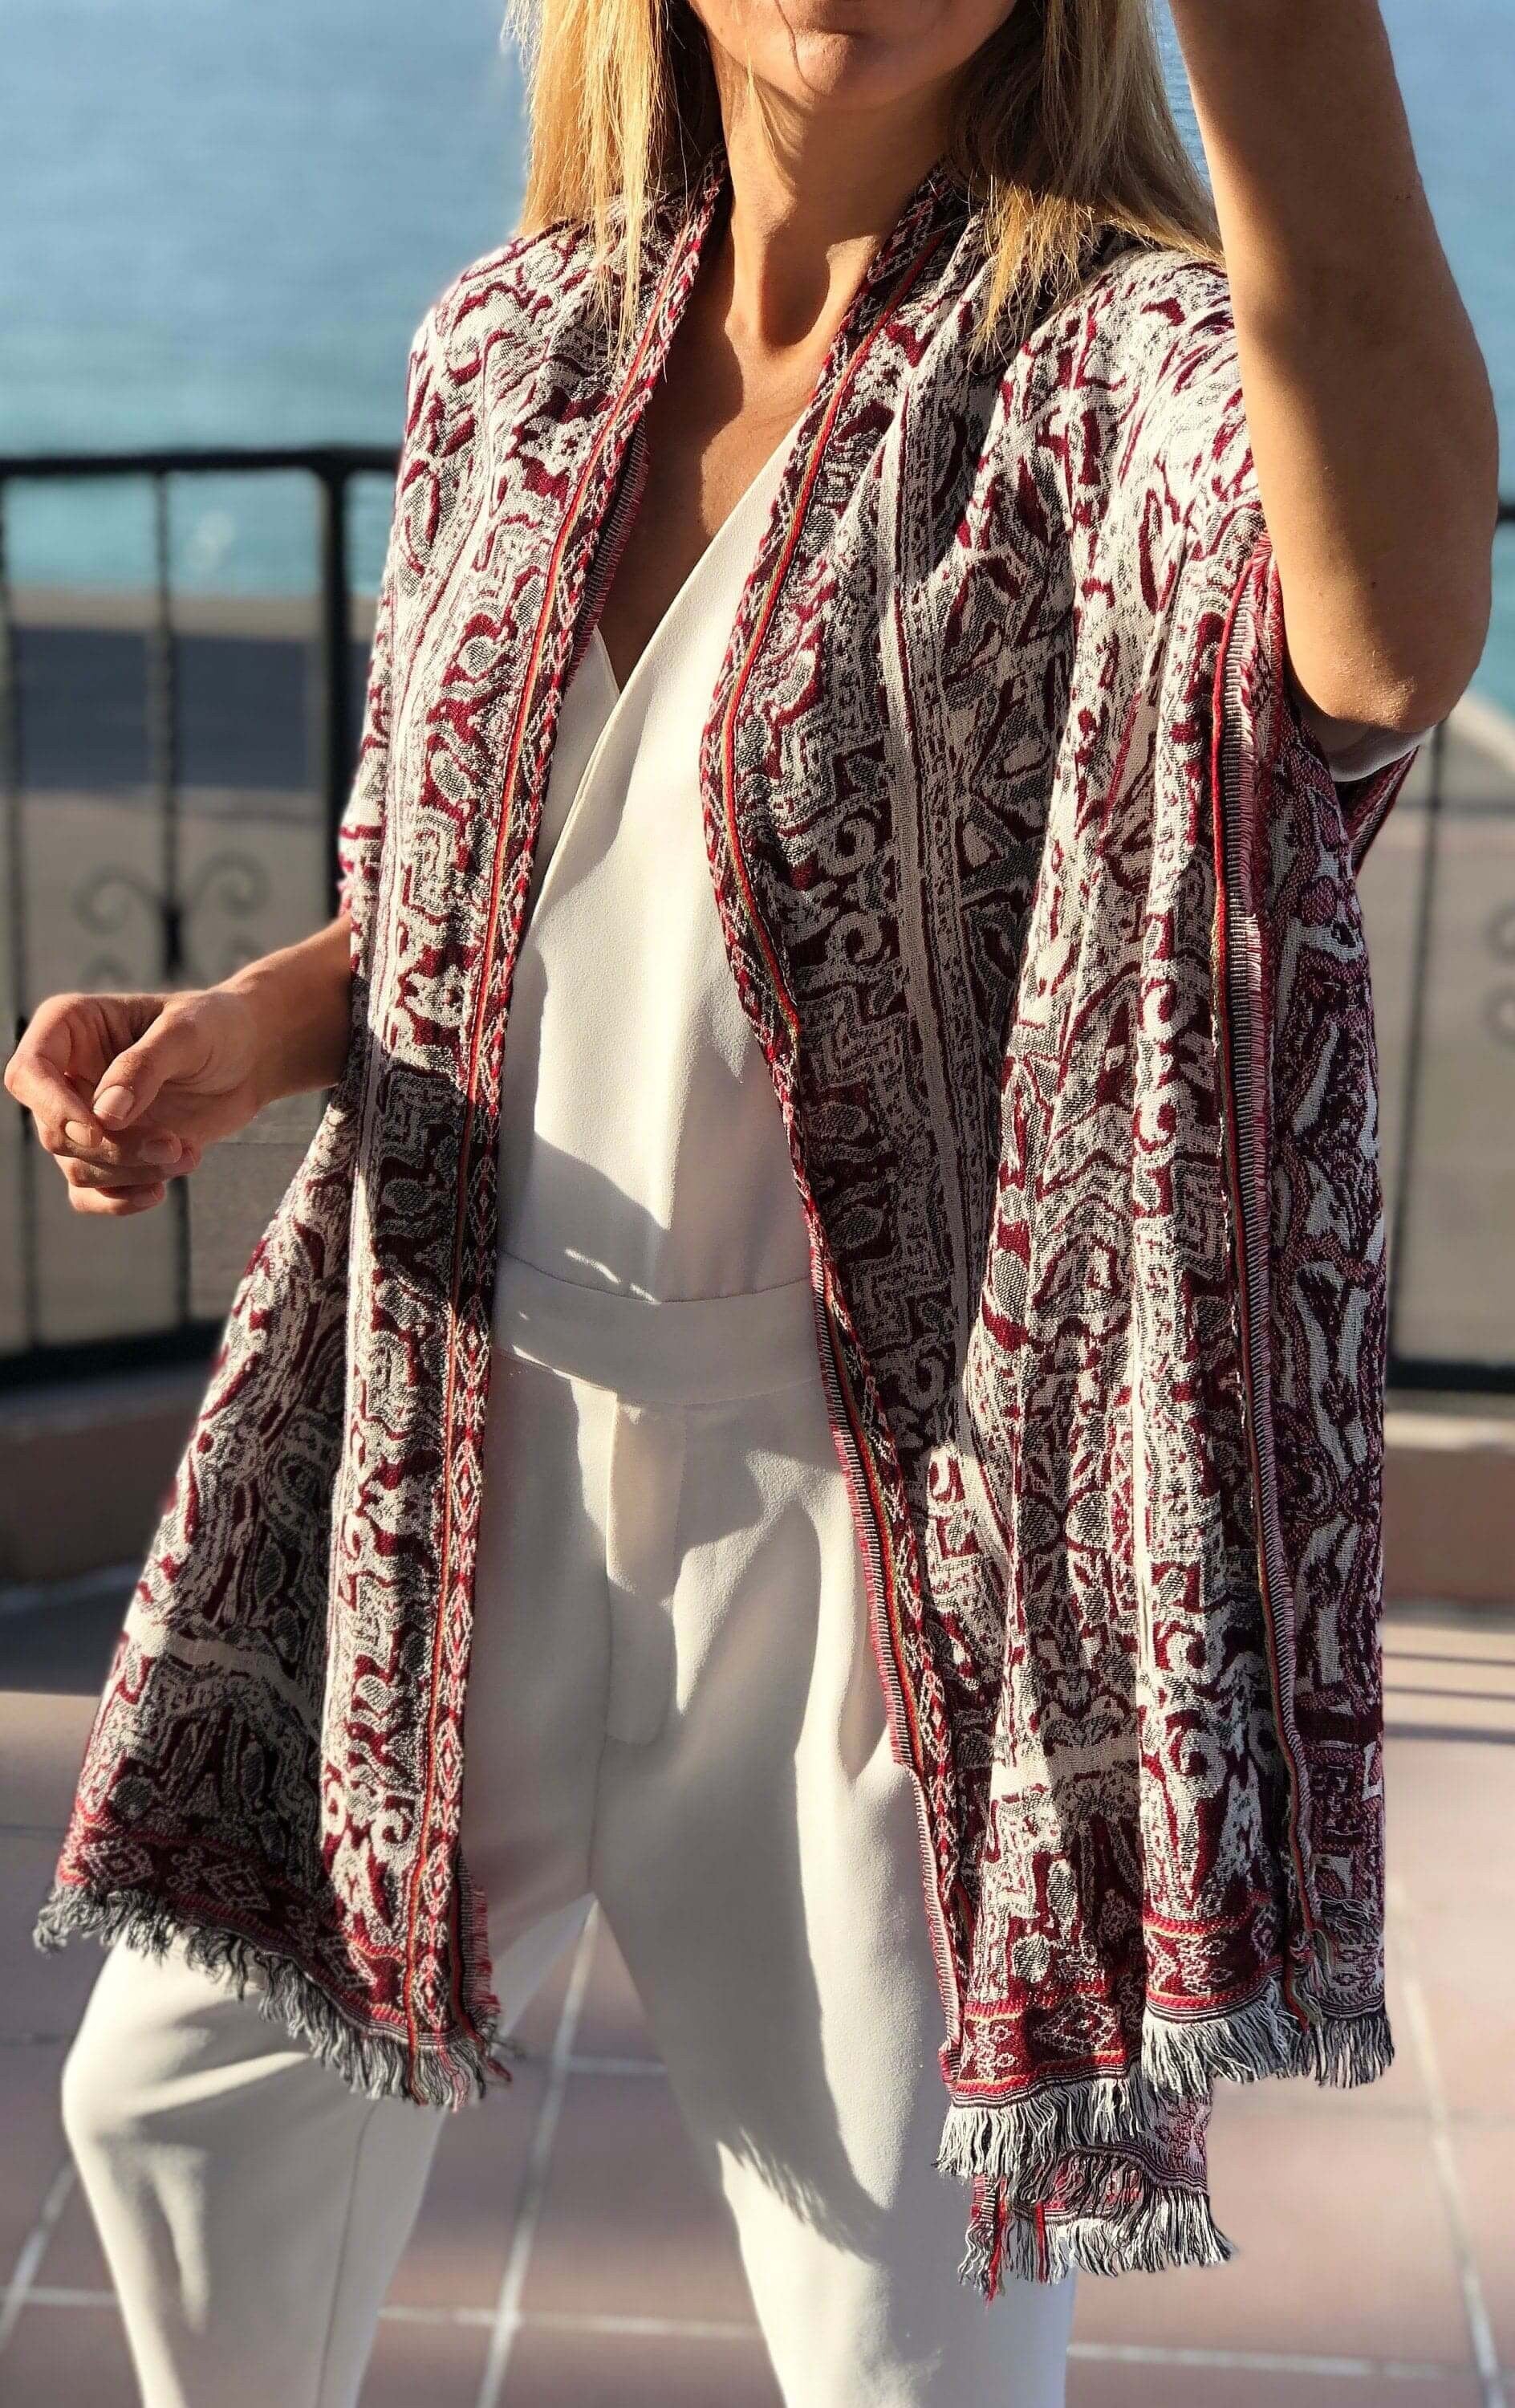 Make a statement with this Red Black White Cotton Scarf, featuring an eye-catching ethnic pattern.